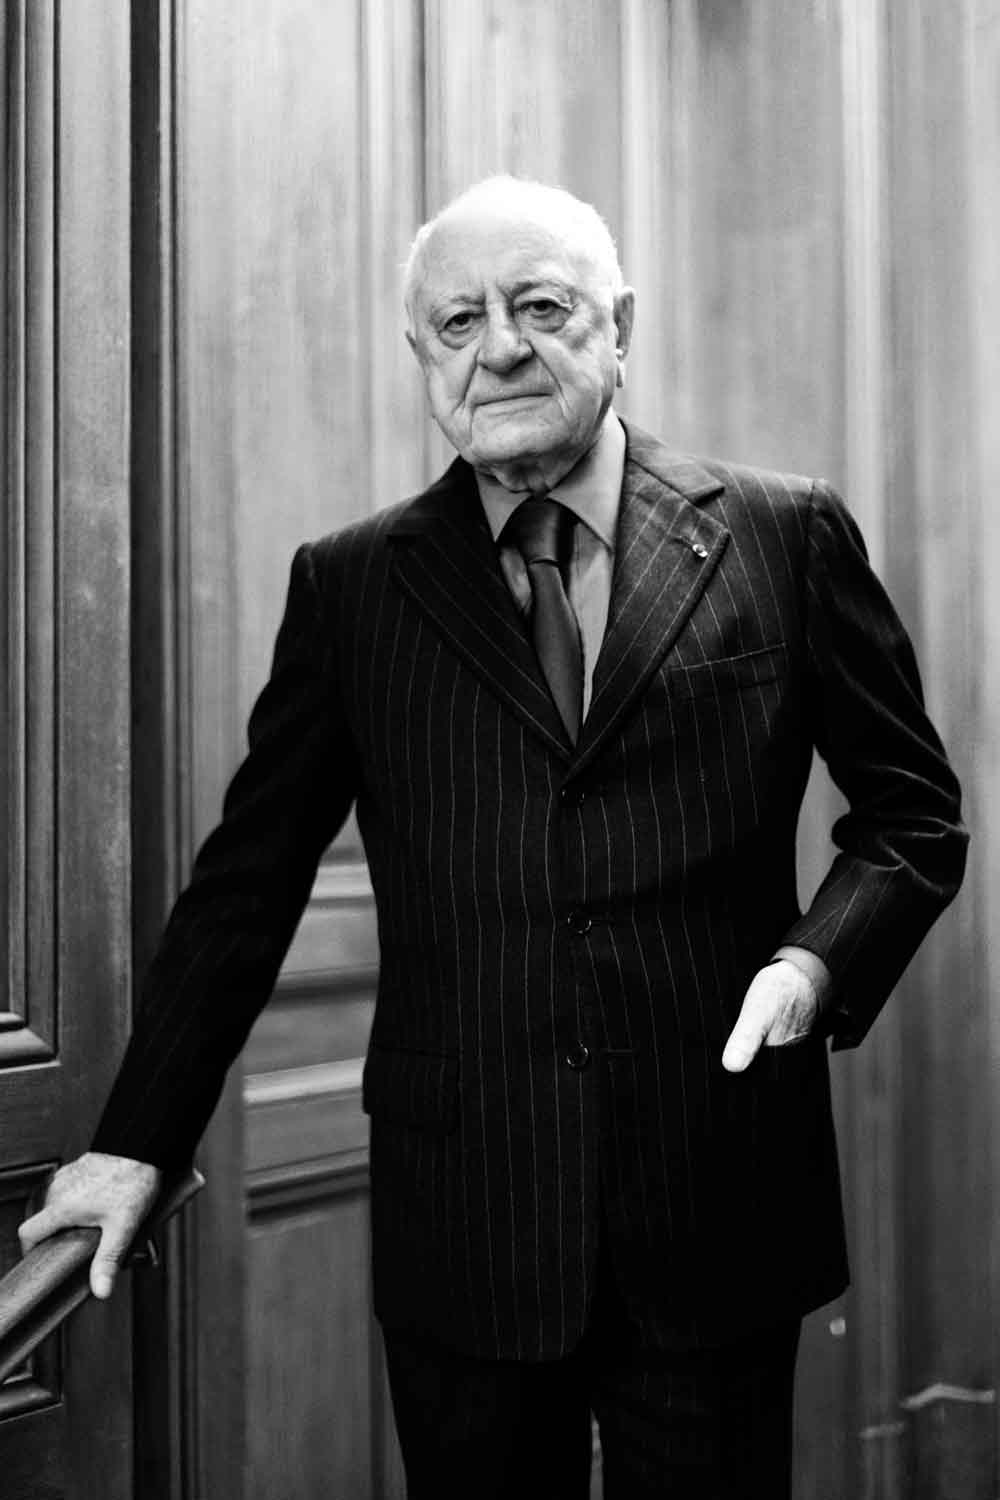 ysl-co-founder-pierre-berge-slams-fashion-houses-now-making-clothes-for-islamic-women